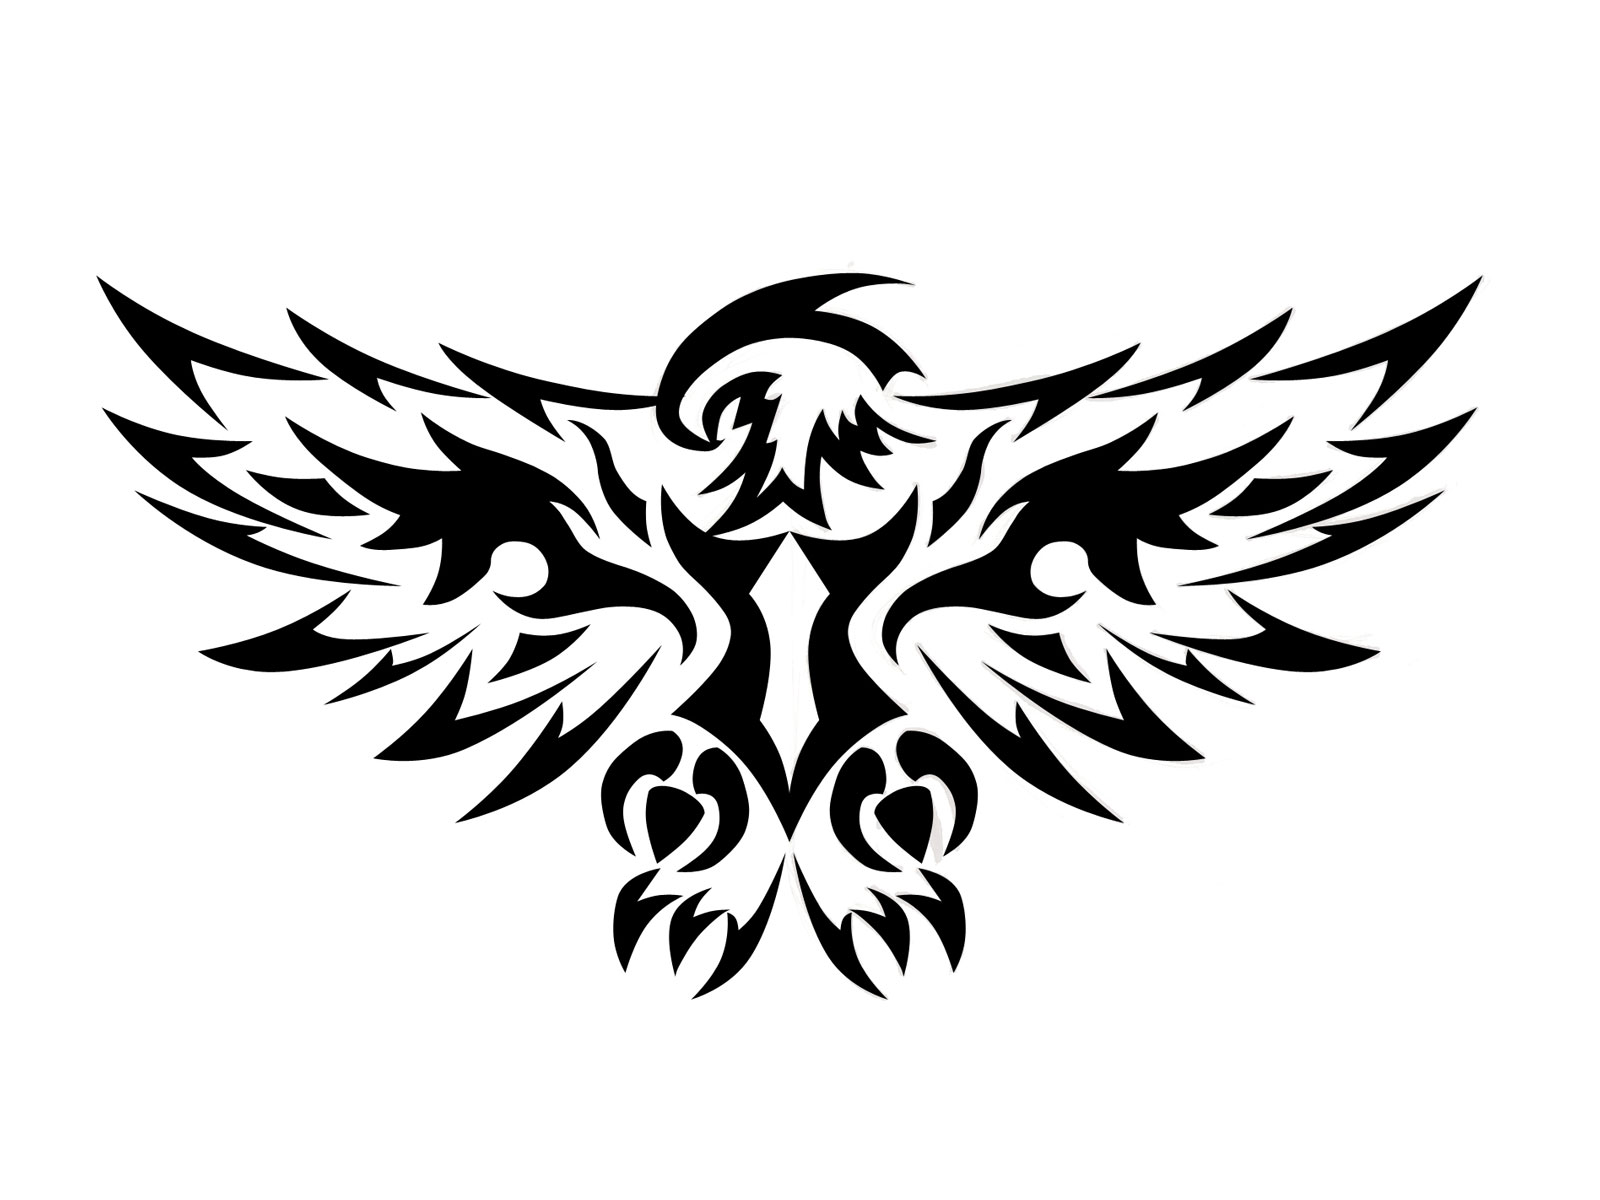 Free designs - Eagle with opened wings tattoo wallpaper